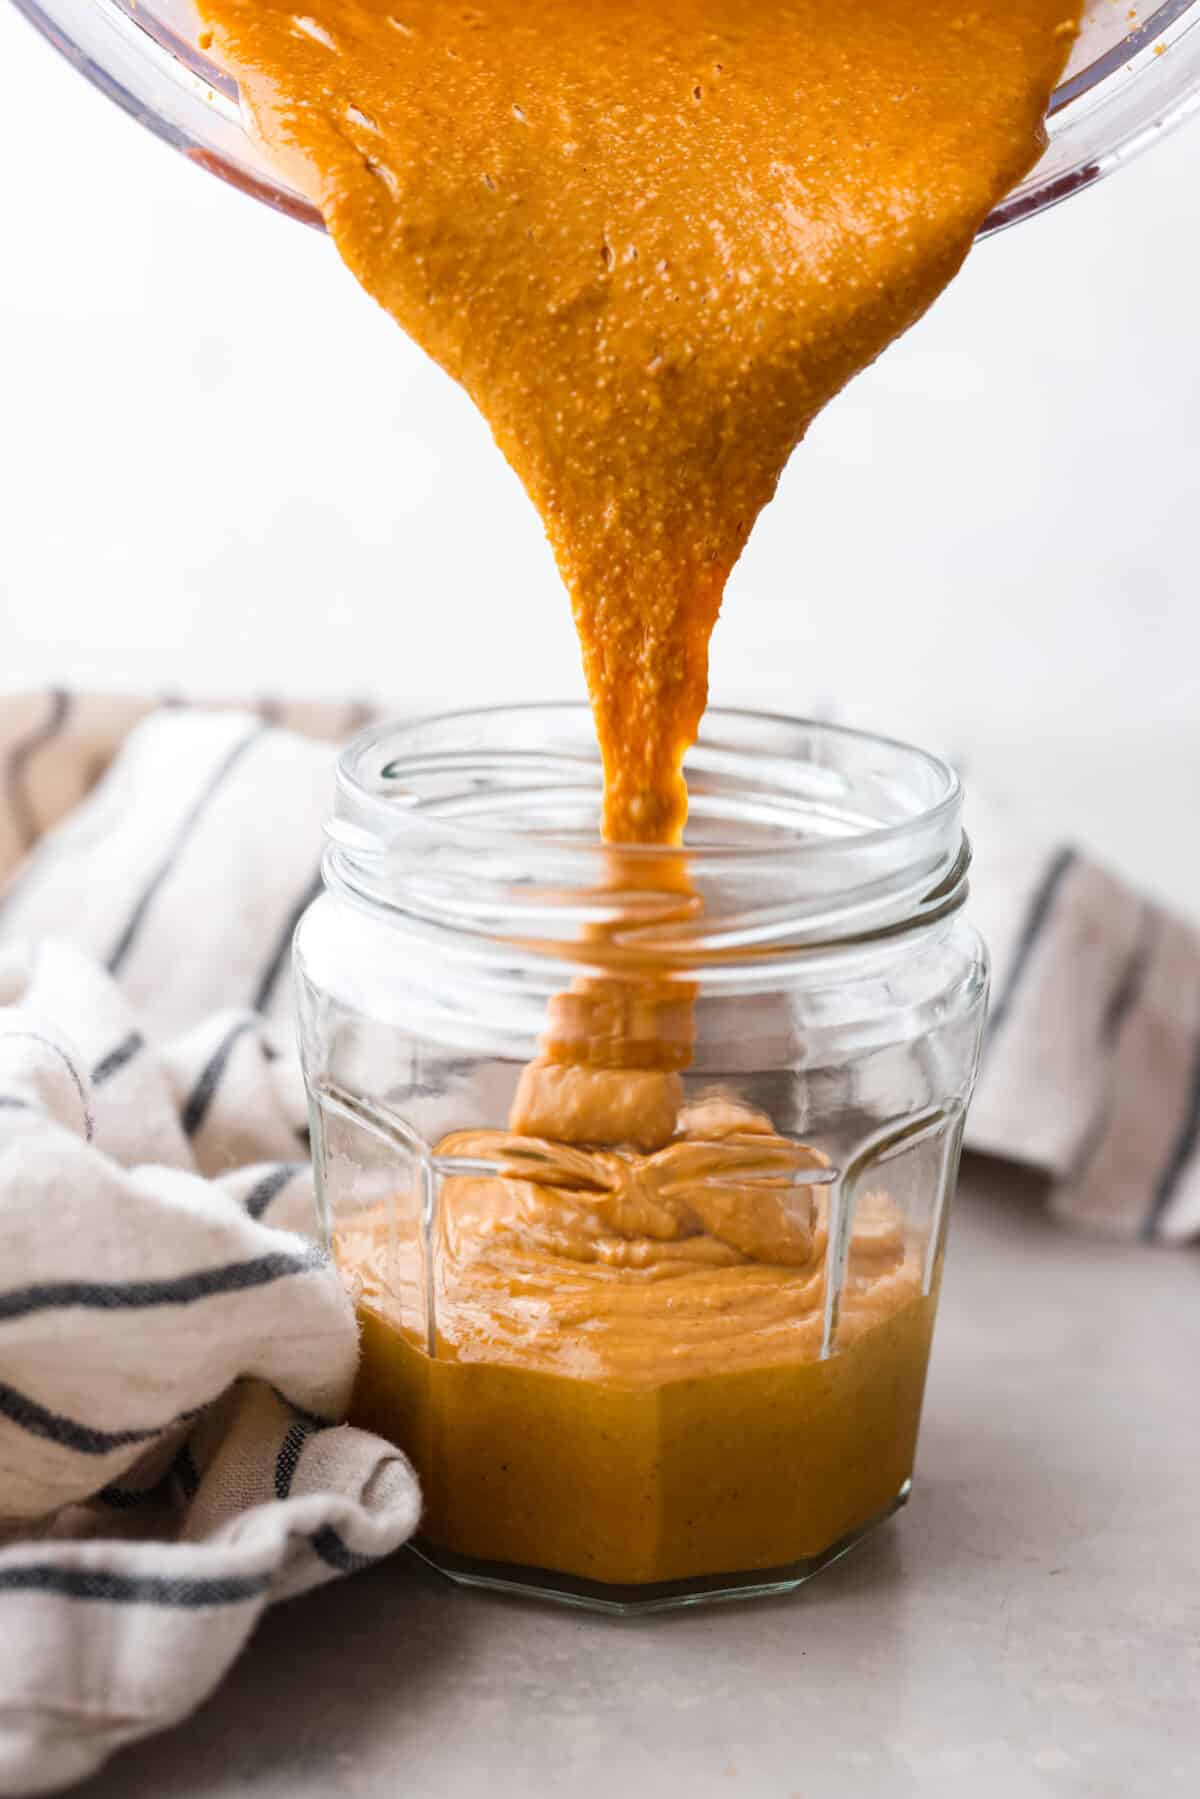 Pouring peanut butter into a glass jar.